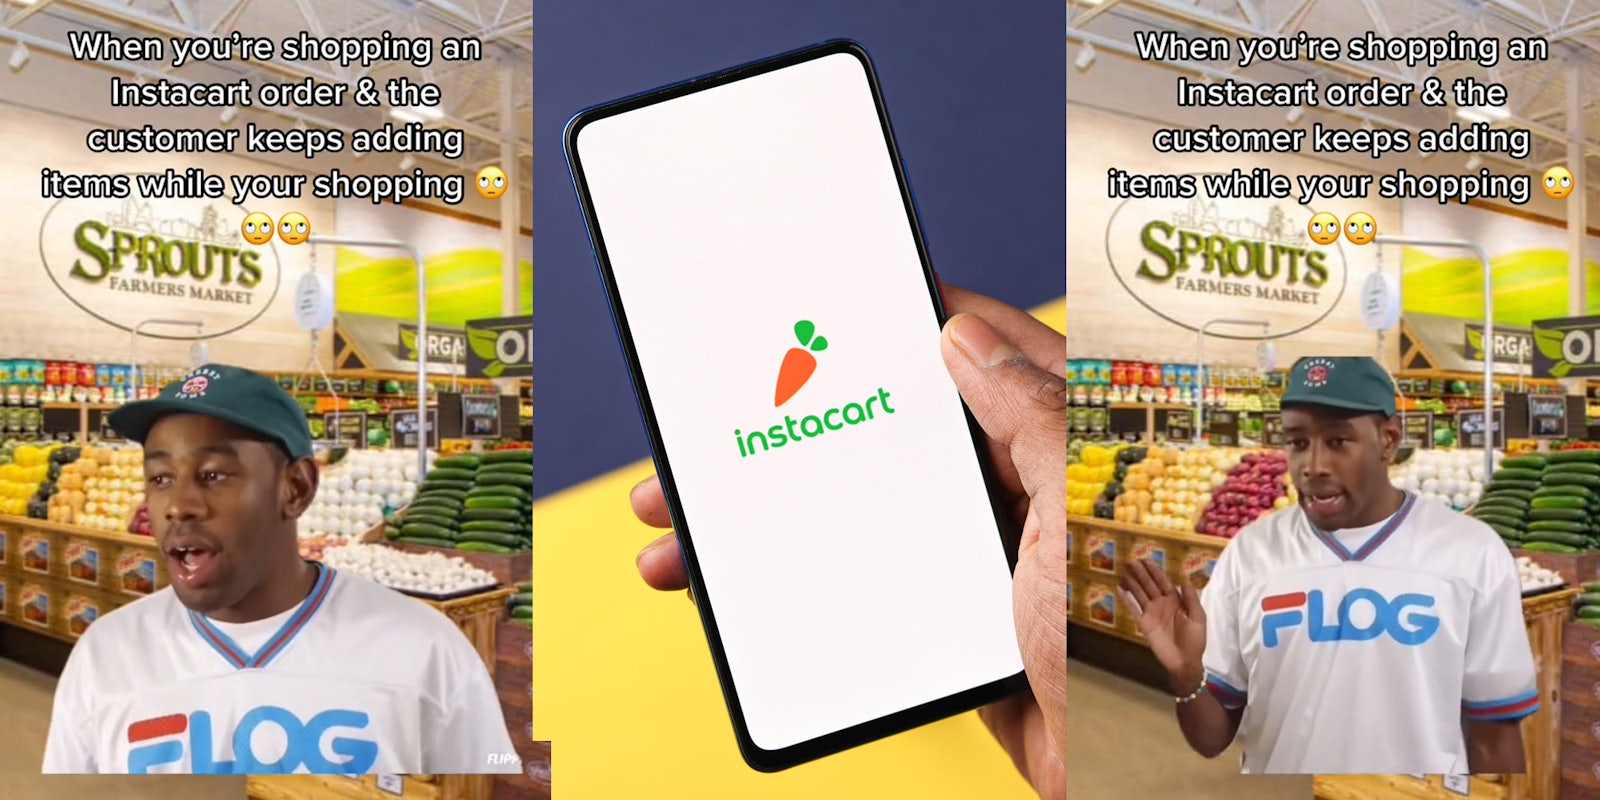 Tyler the Creator meme over image of Sprout's interior with caption 'When you're shopping an Instacart order & the customer keeps adding items while your shopping' (l) Instacart on phone screen in hand in front of purple to yellow diagonal split background (c) Tyler the Creator meme over image of Sprout's interior with caption 'When you're shopping an Instacart order & the customer keeps adding items while your shopping' (r)